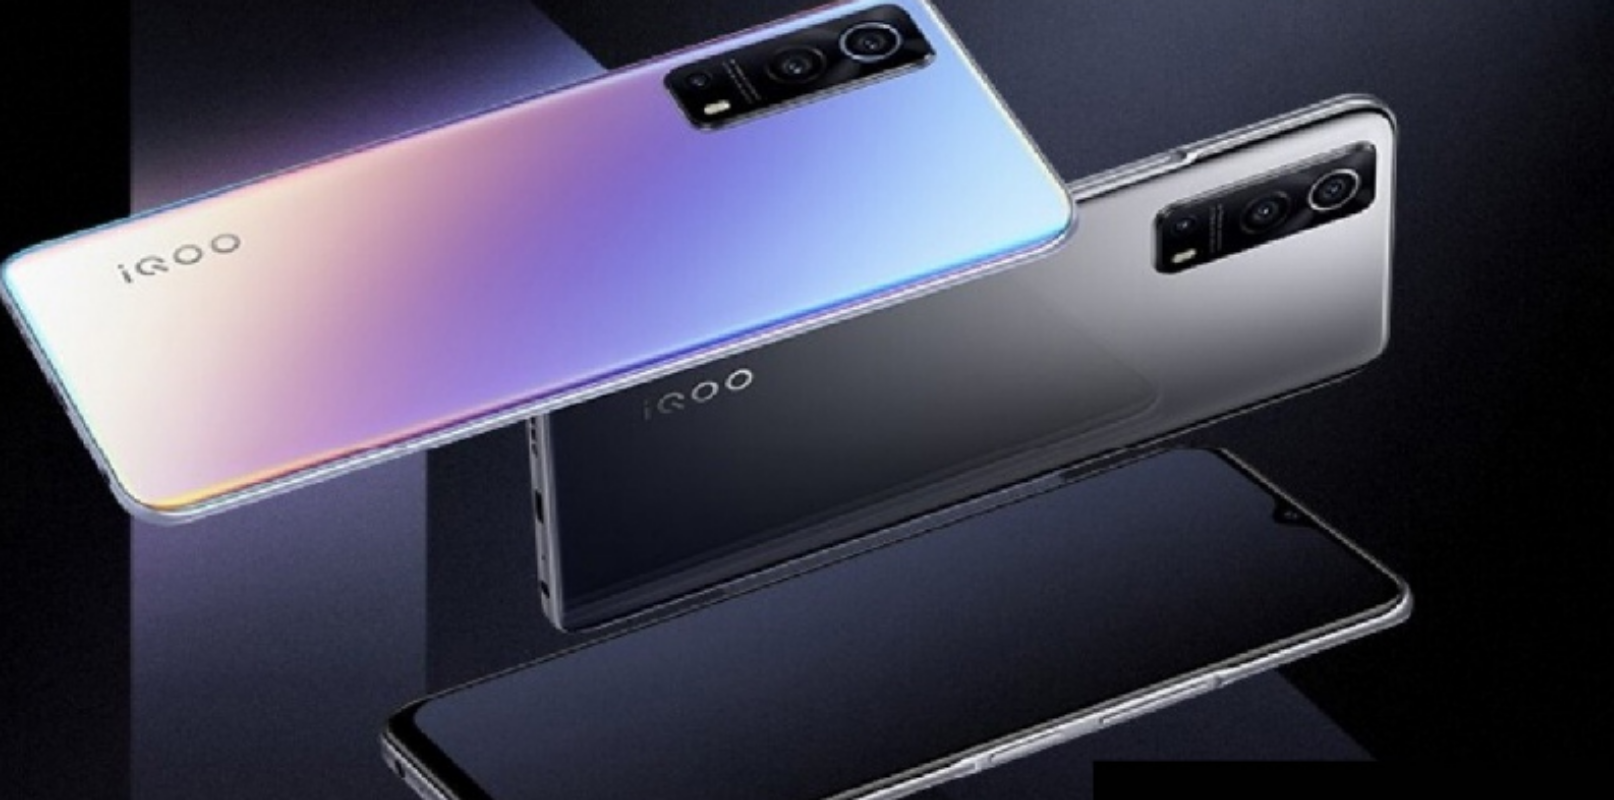 Vivo IQOO Z5 Specifications, Launch Date and Price in India: From Processor to Camera, everything you need to know